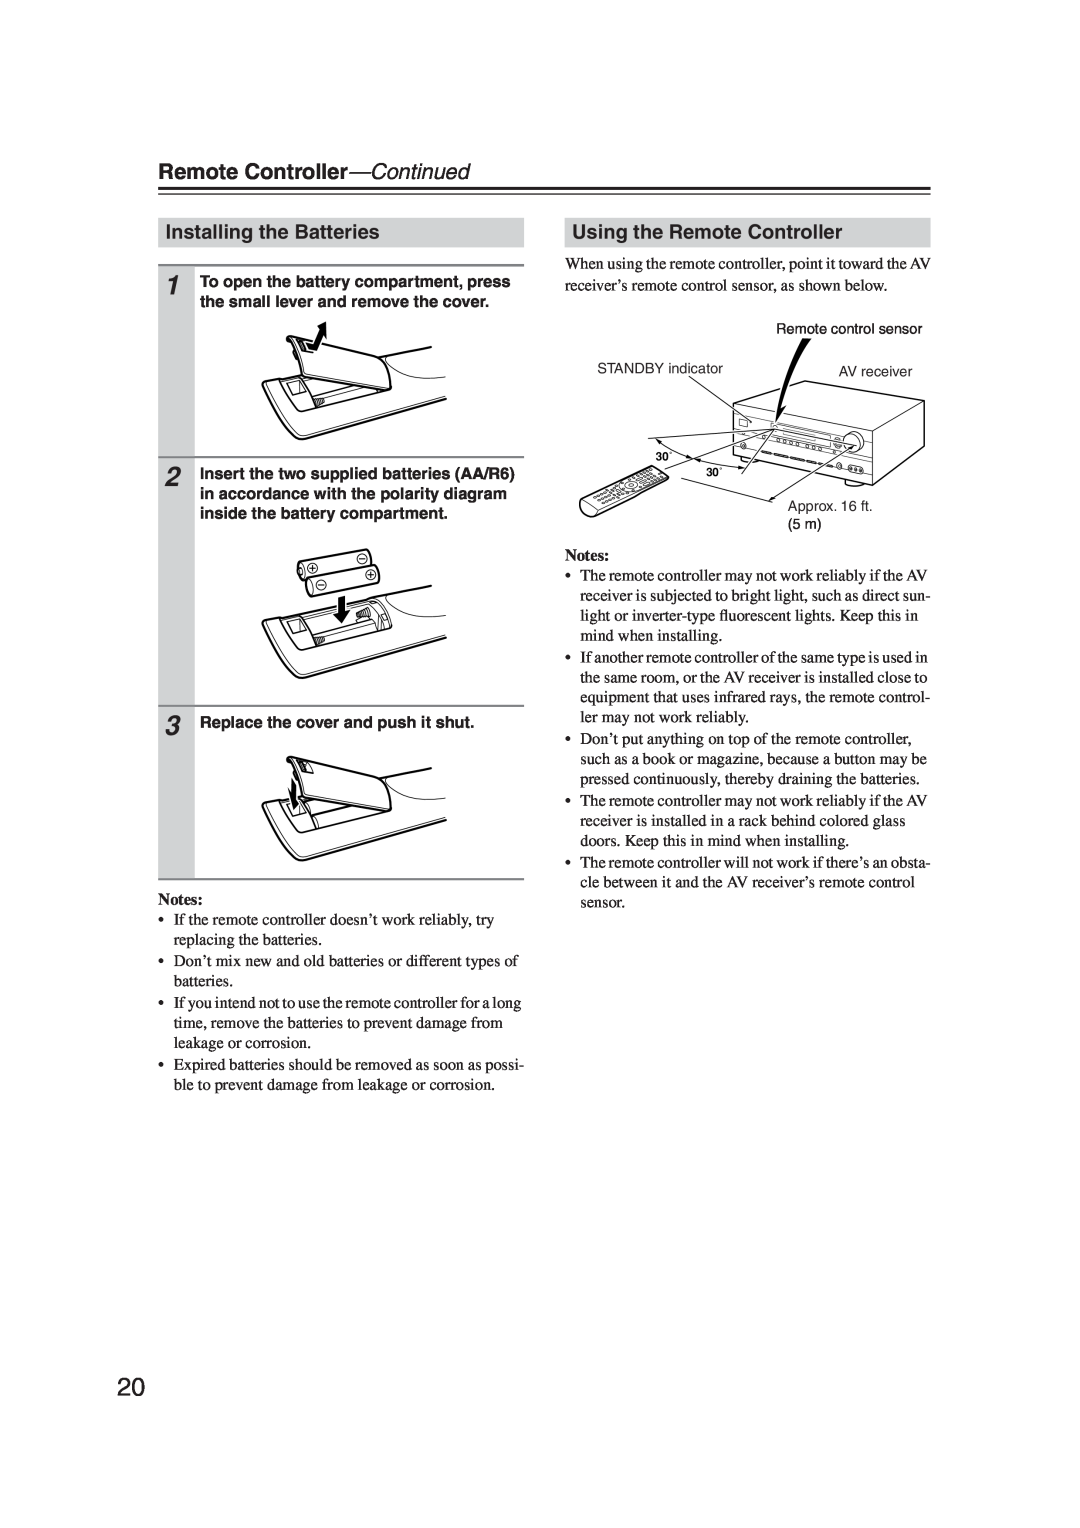 Onkyo S5100 instruction manual Installing the Batteries, Using the Remote Controller, Remote Controller—Continued, Notes 